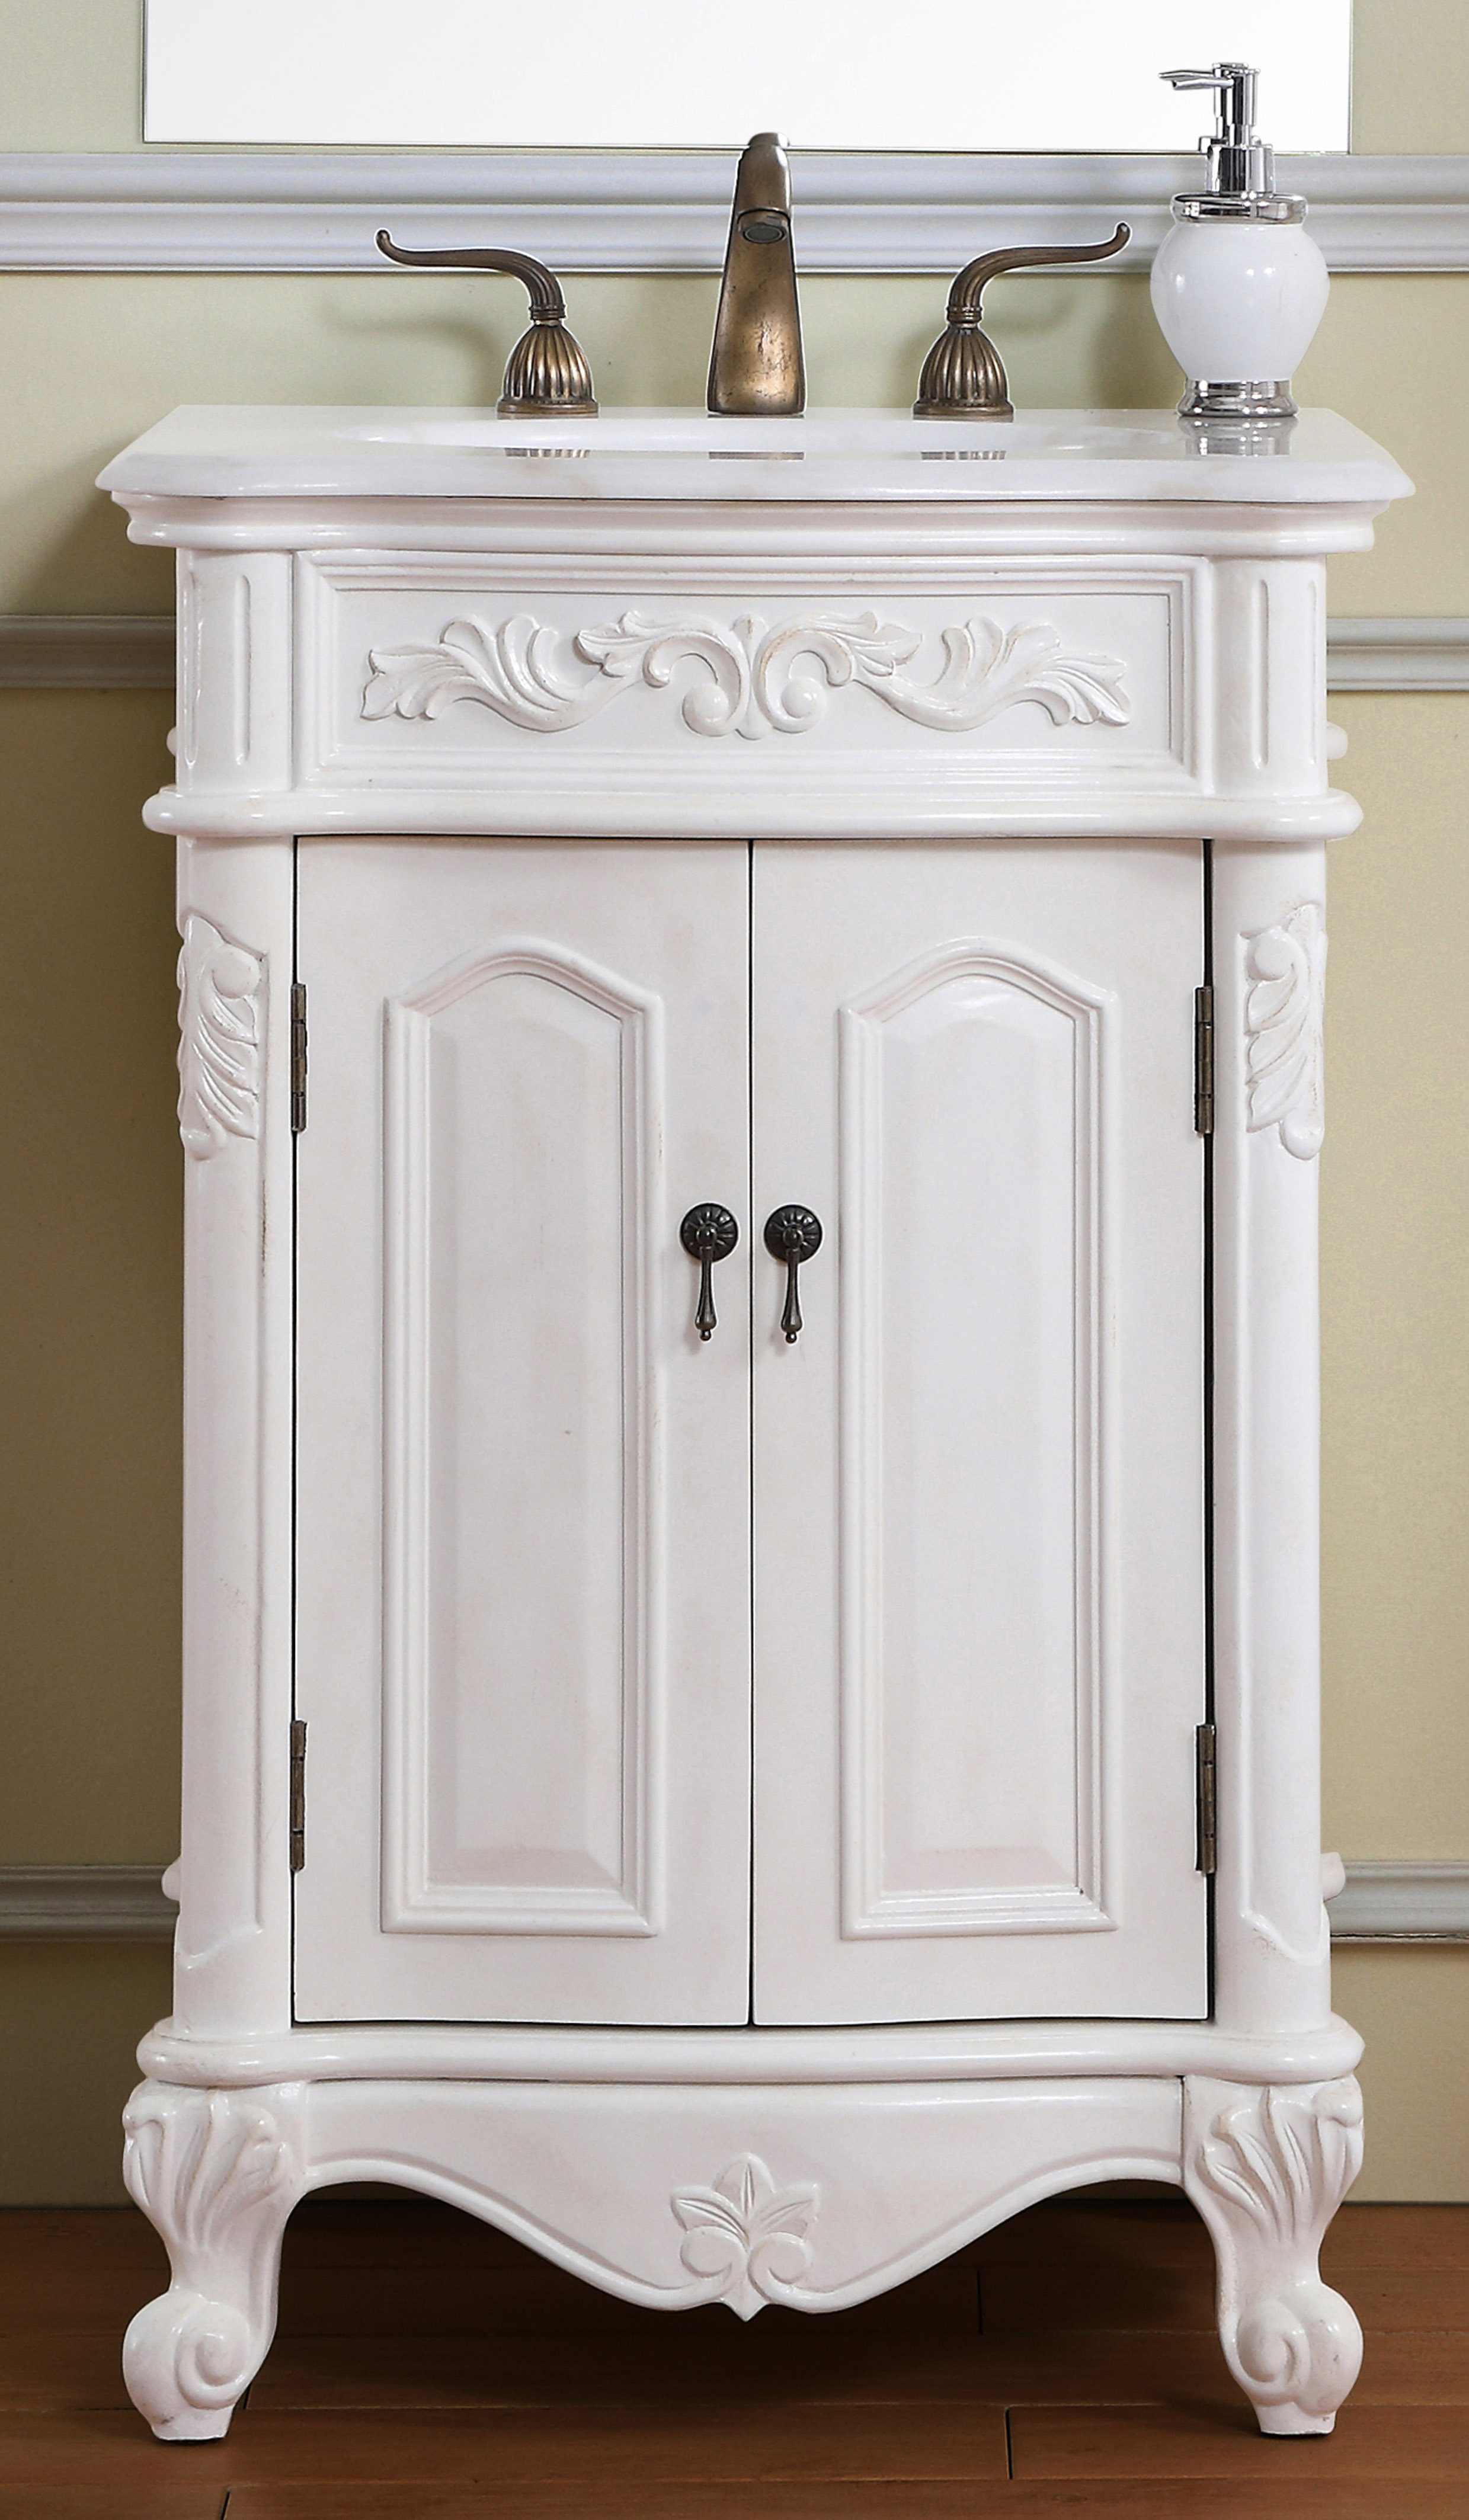 24" Adelina Antique White Finish Vanity with Victorian Style Legs